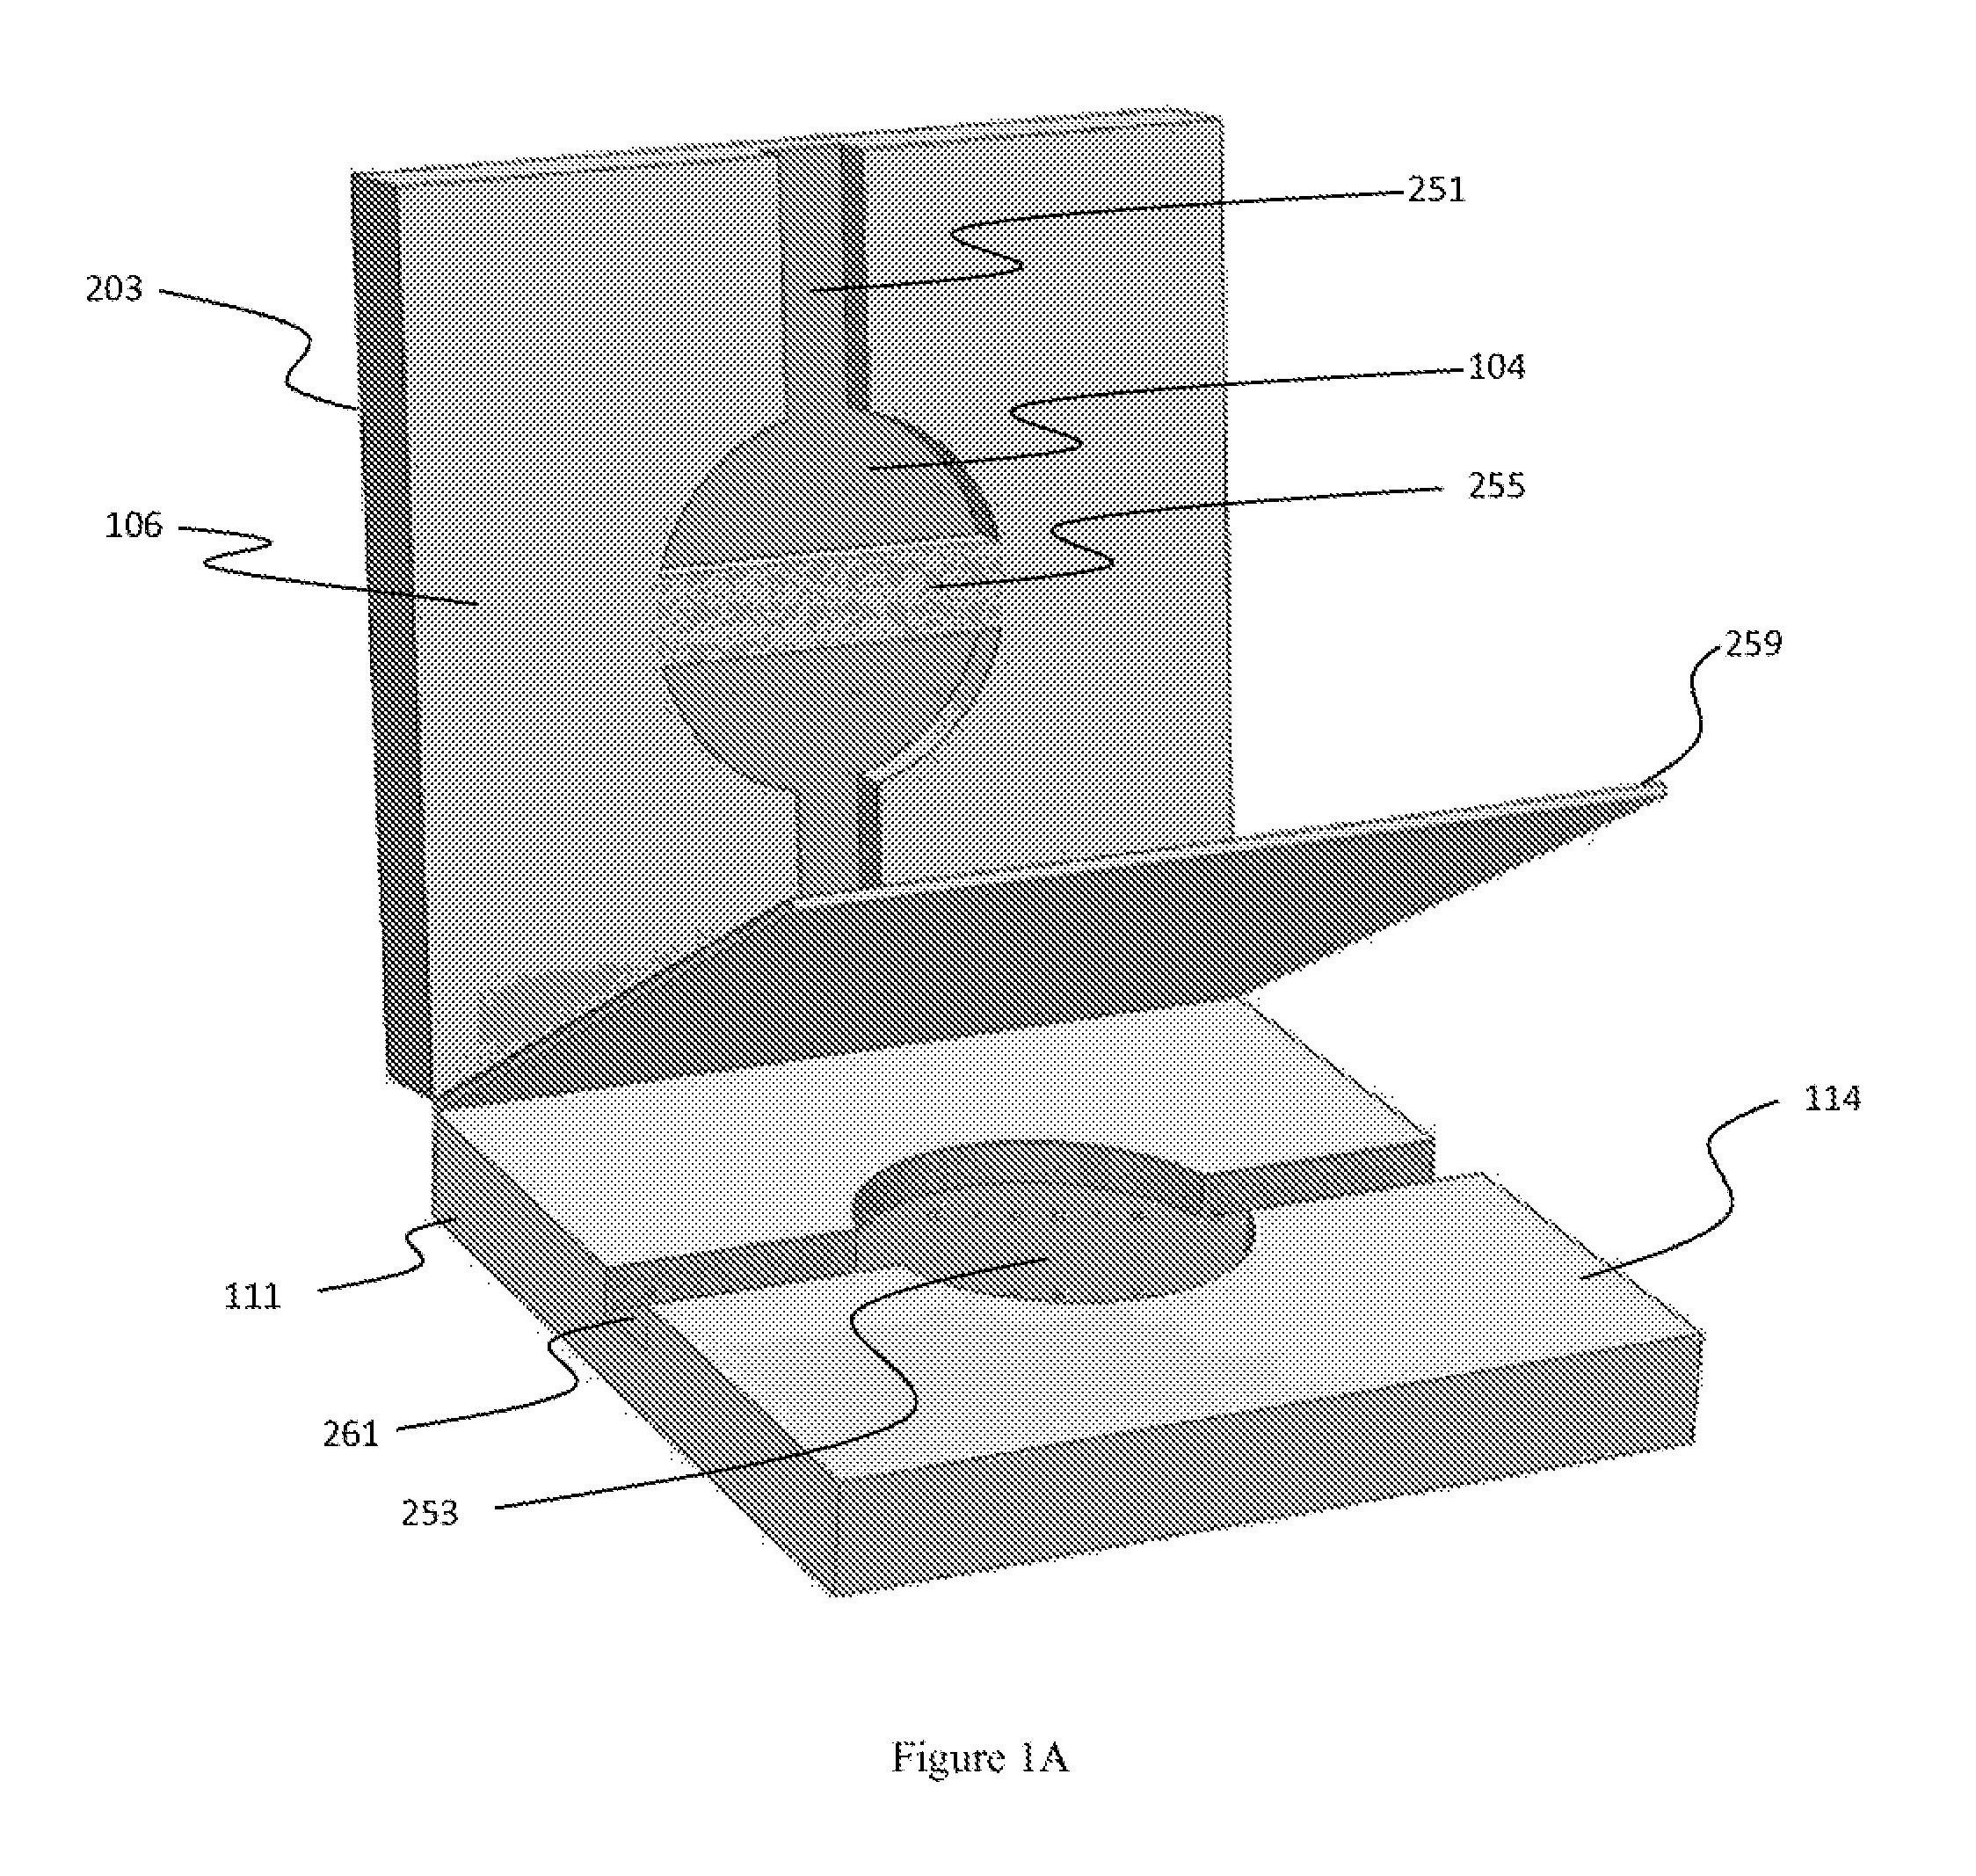 Universal Sample Preparation System and Use in an Integrated Analysis System